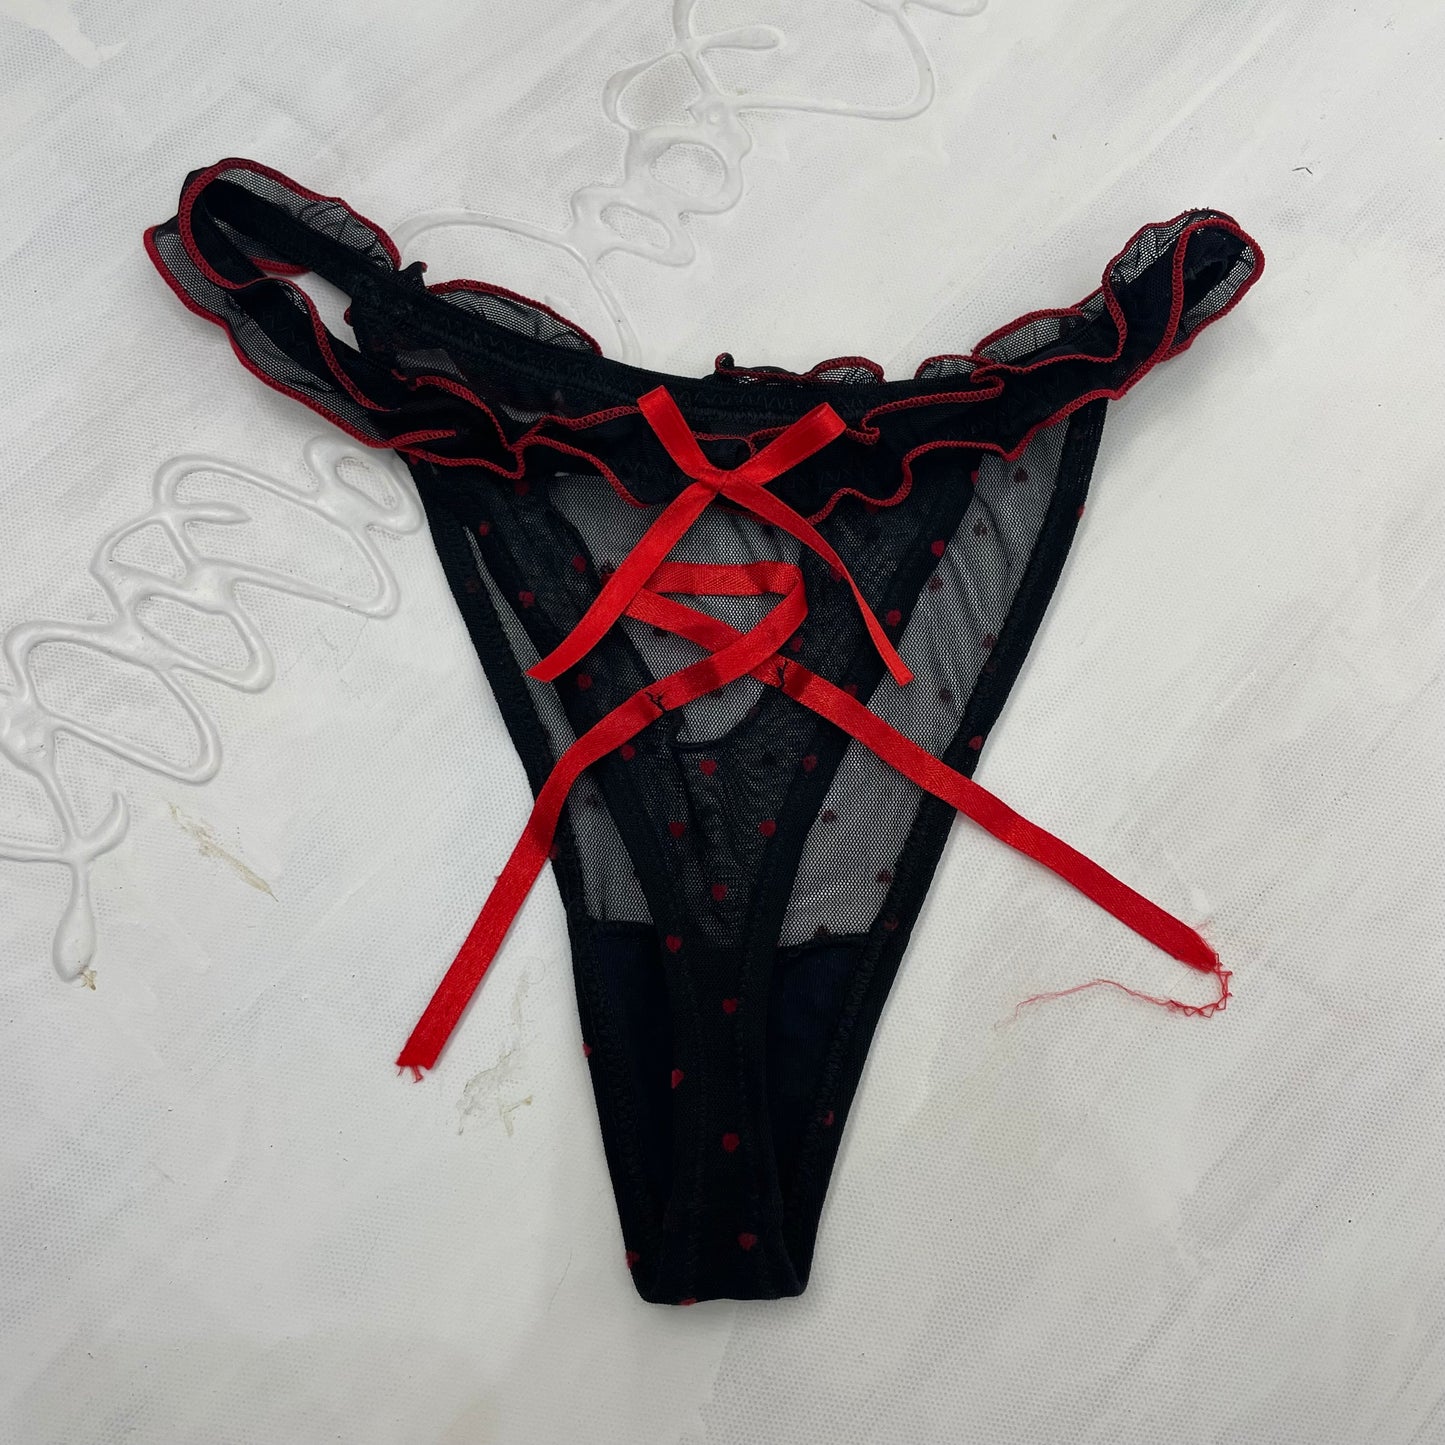 GALENTINES DAY DROP | small black mesh underwear with red bow